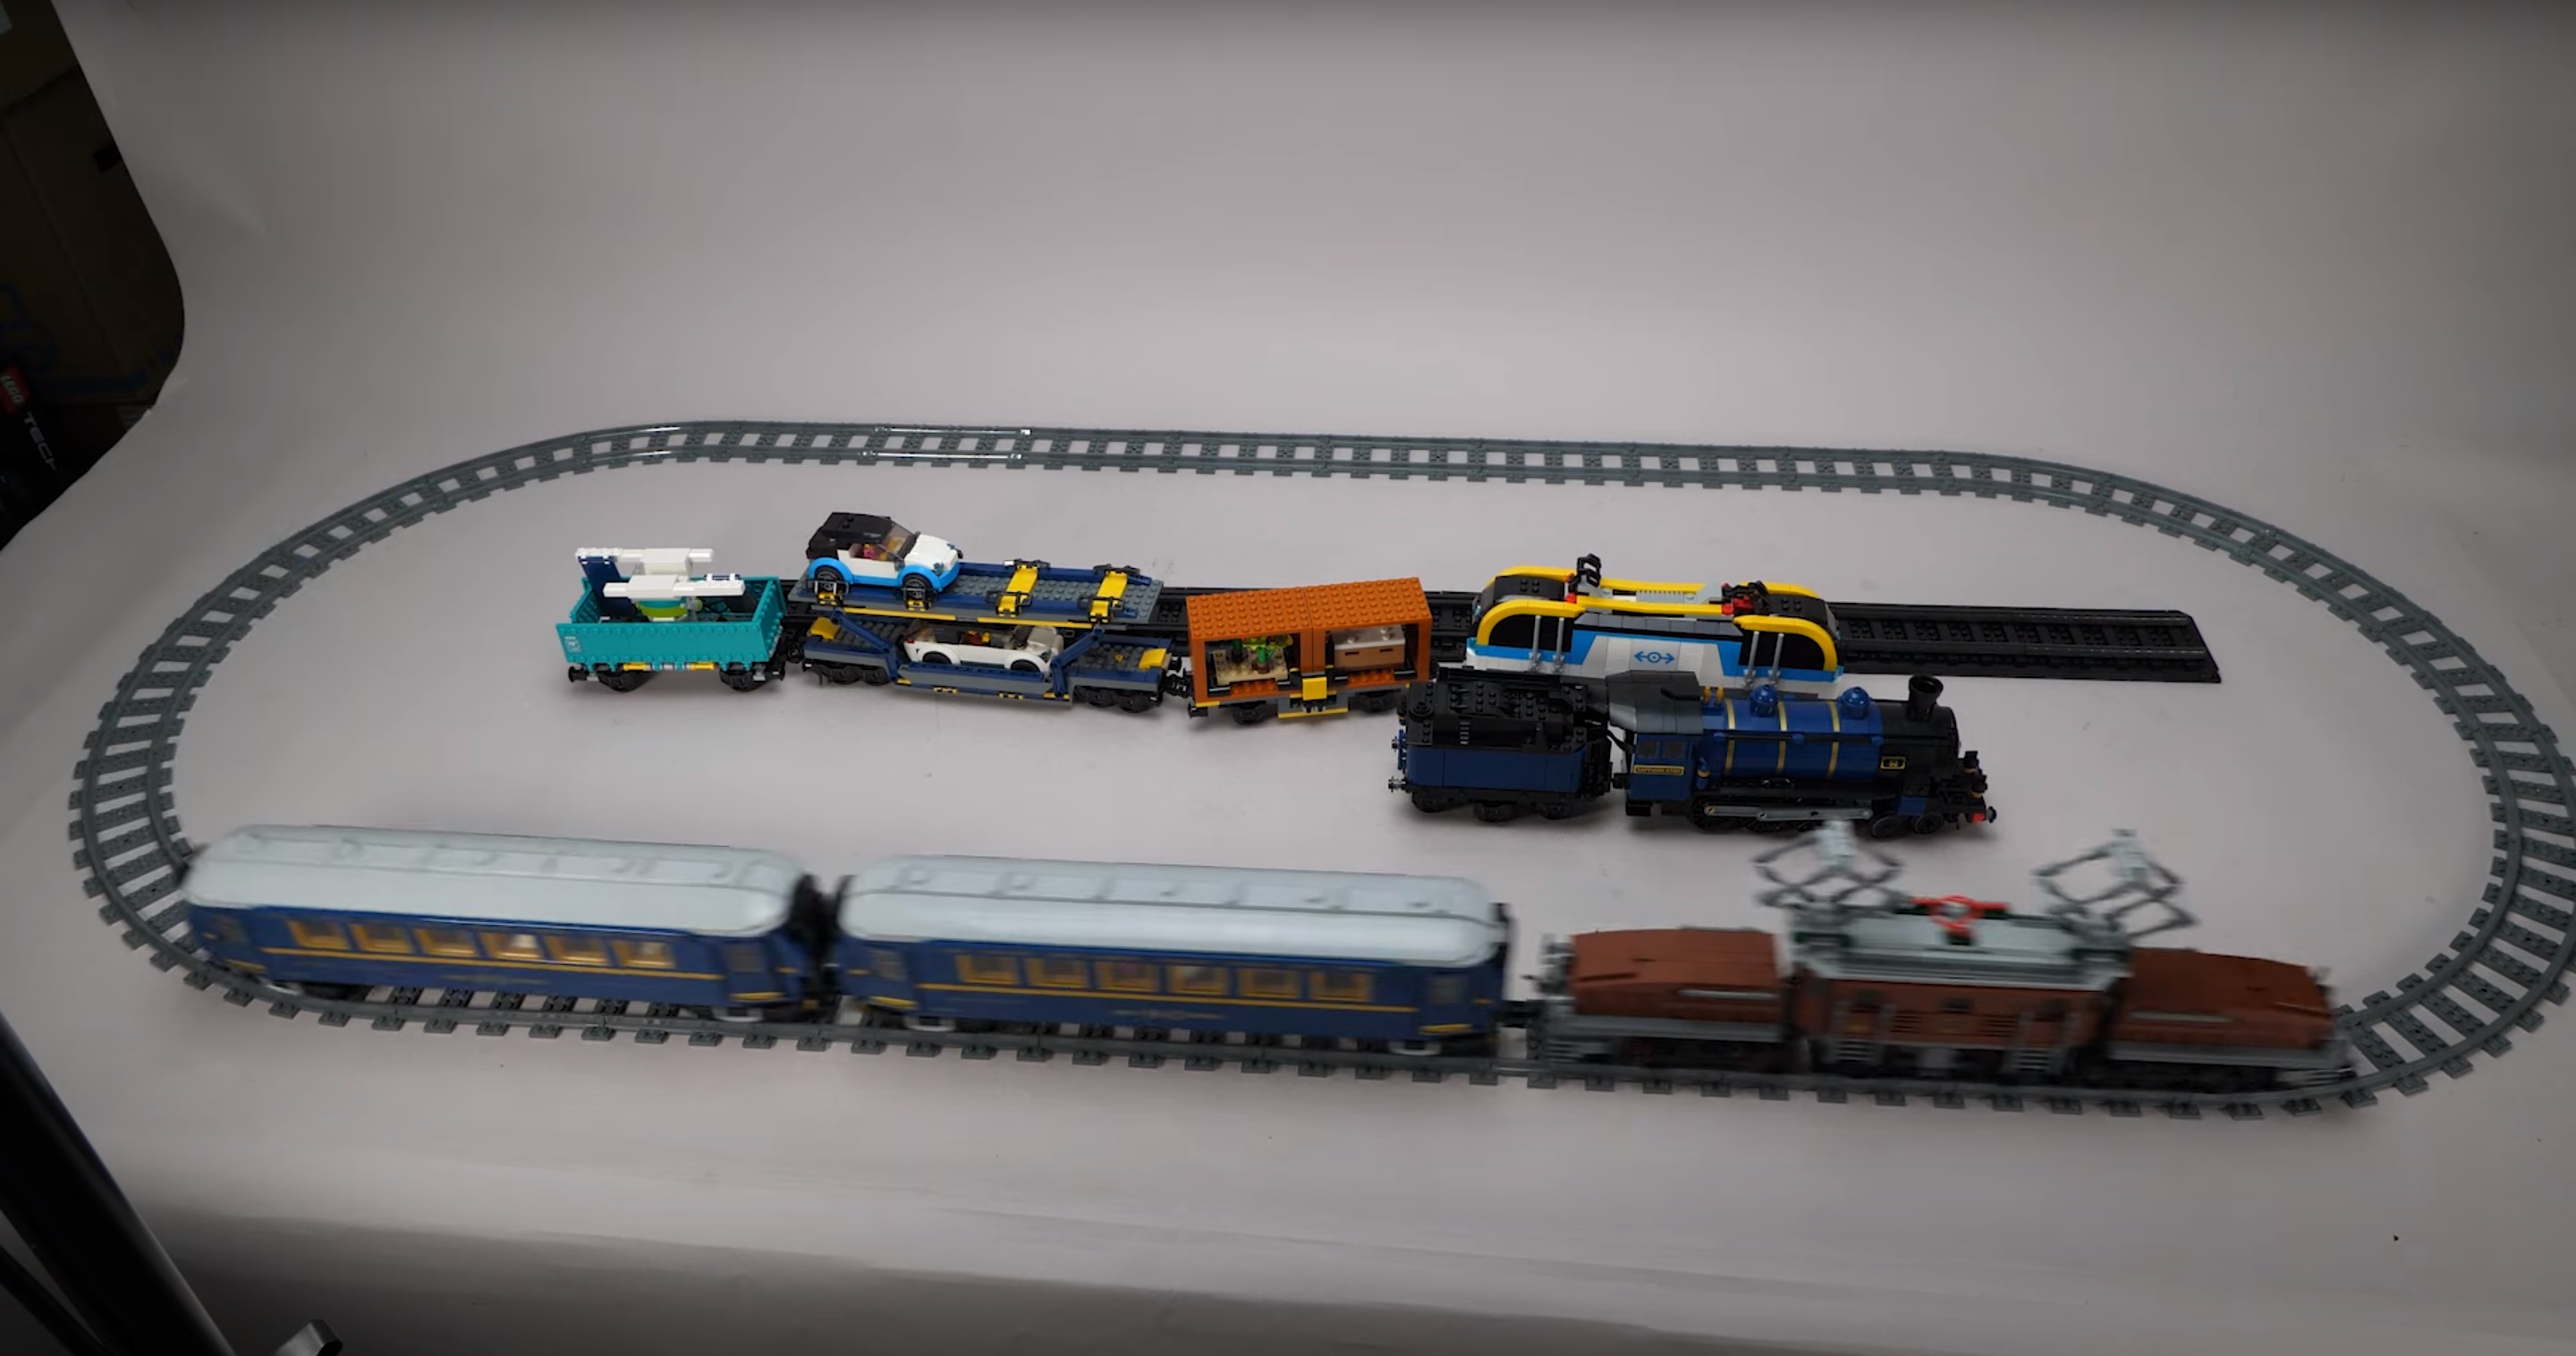 Better Images of LEGO City Freight Train (60336) - The Brick Fan